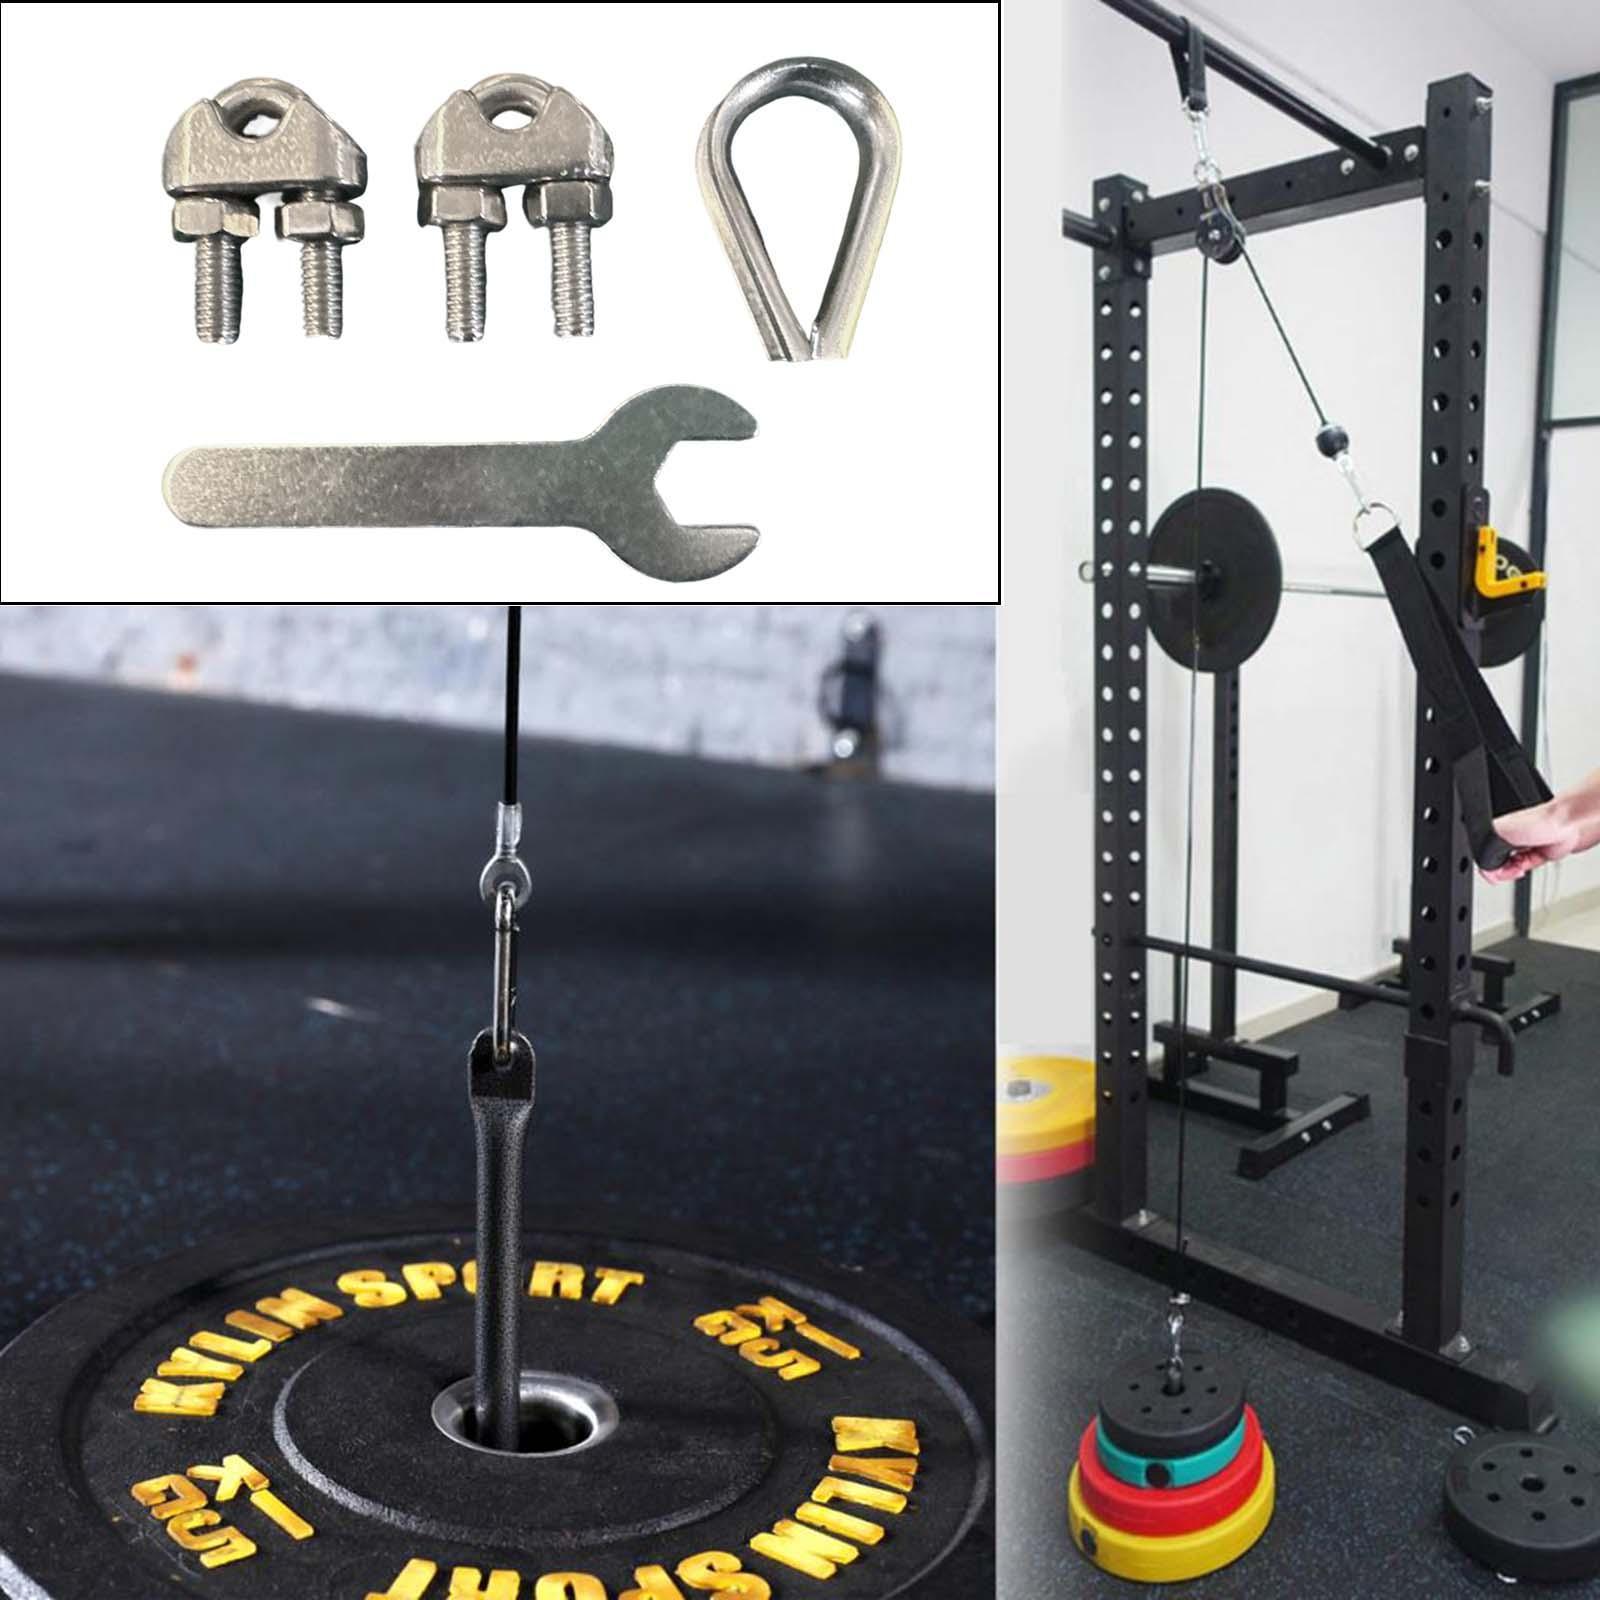 Wire Rope Locks Accessories Set Equipment Gym Training for Gym Machine Cable Weight Cable